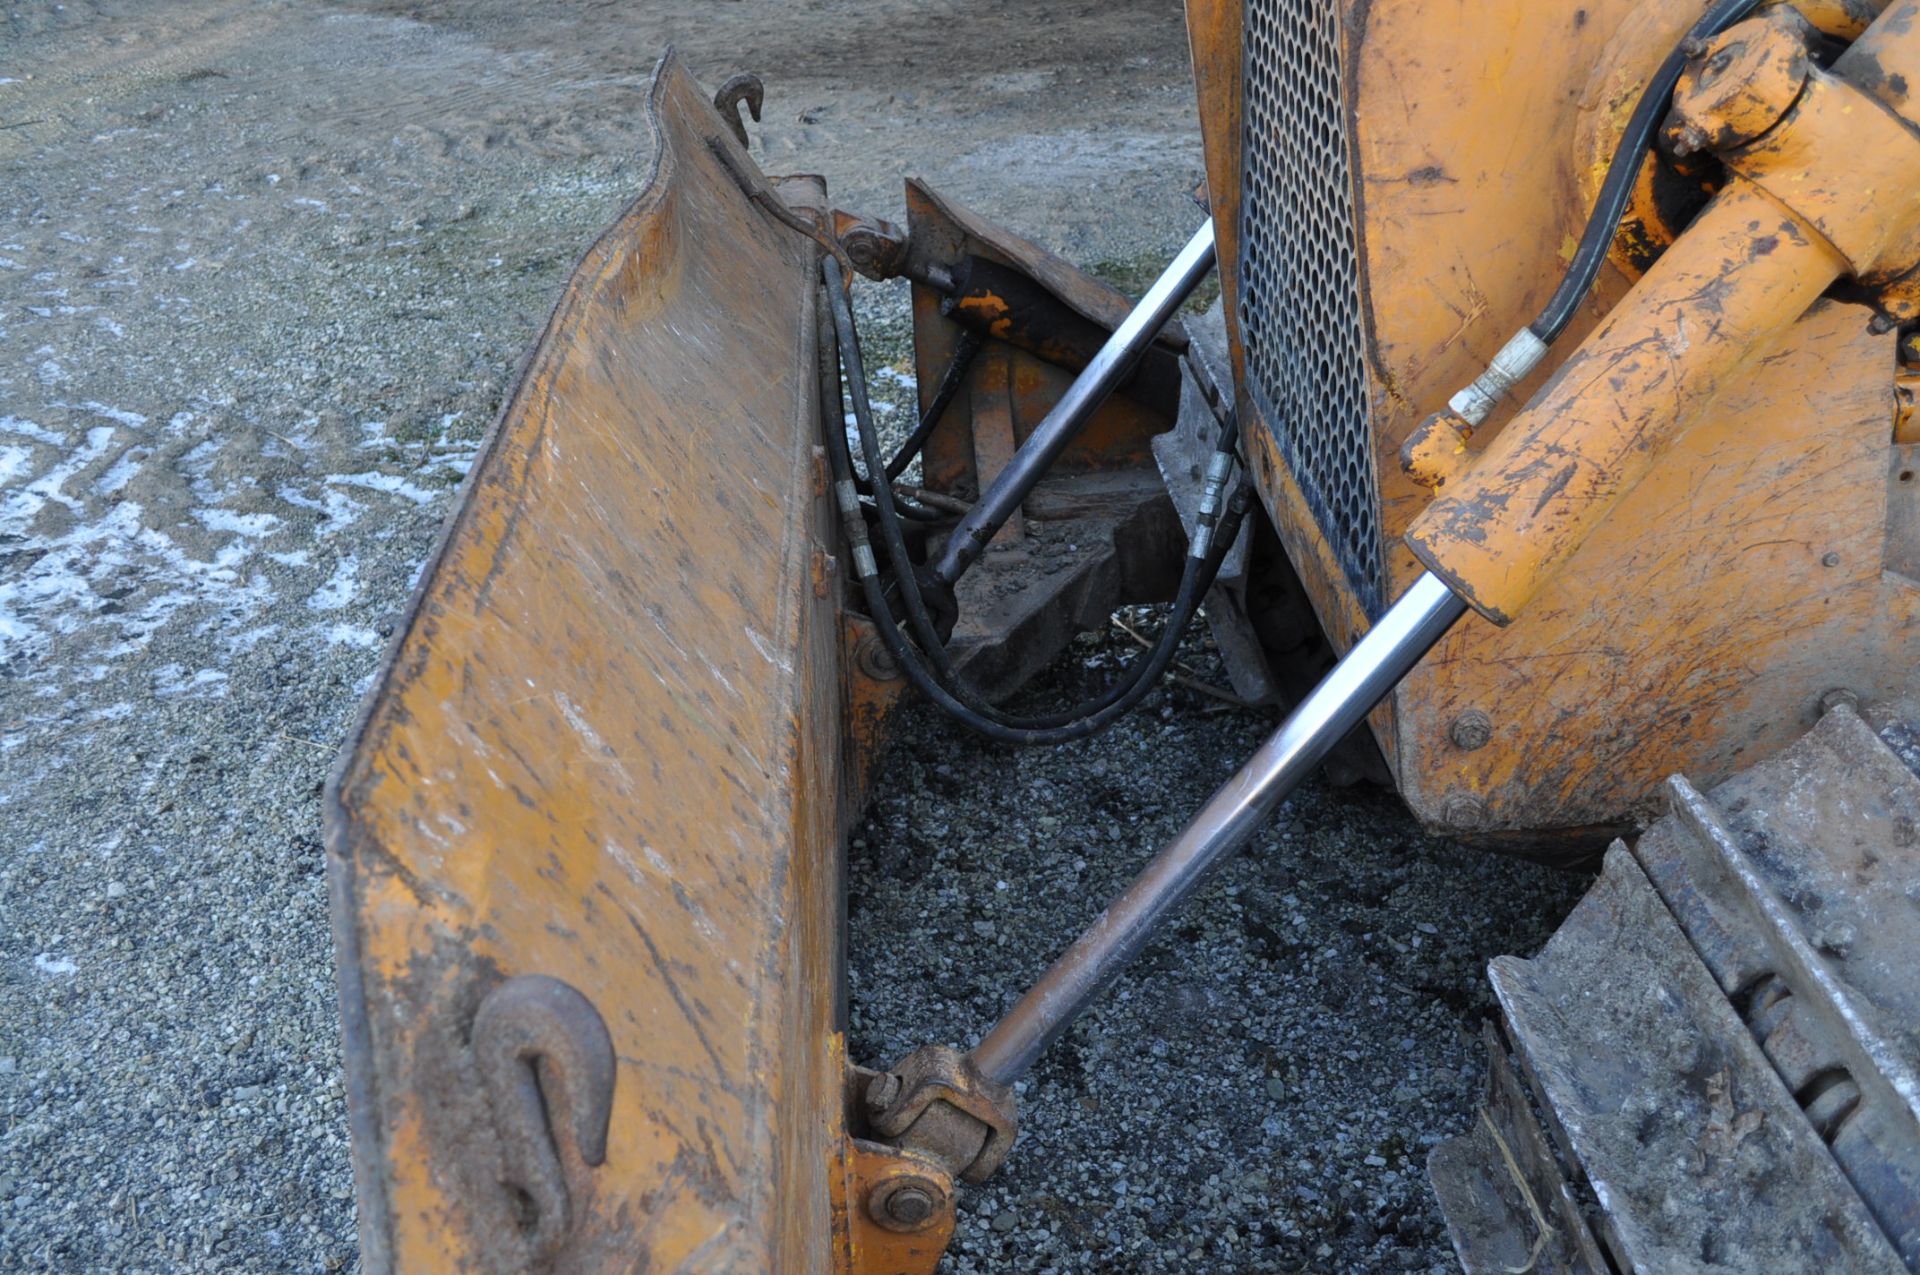 Case 1150 dozer, 8’ 4 way blade, rear hitch, diesel, shows 1250 hrs, hrs unkown, SN missing - Image 7 of 11